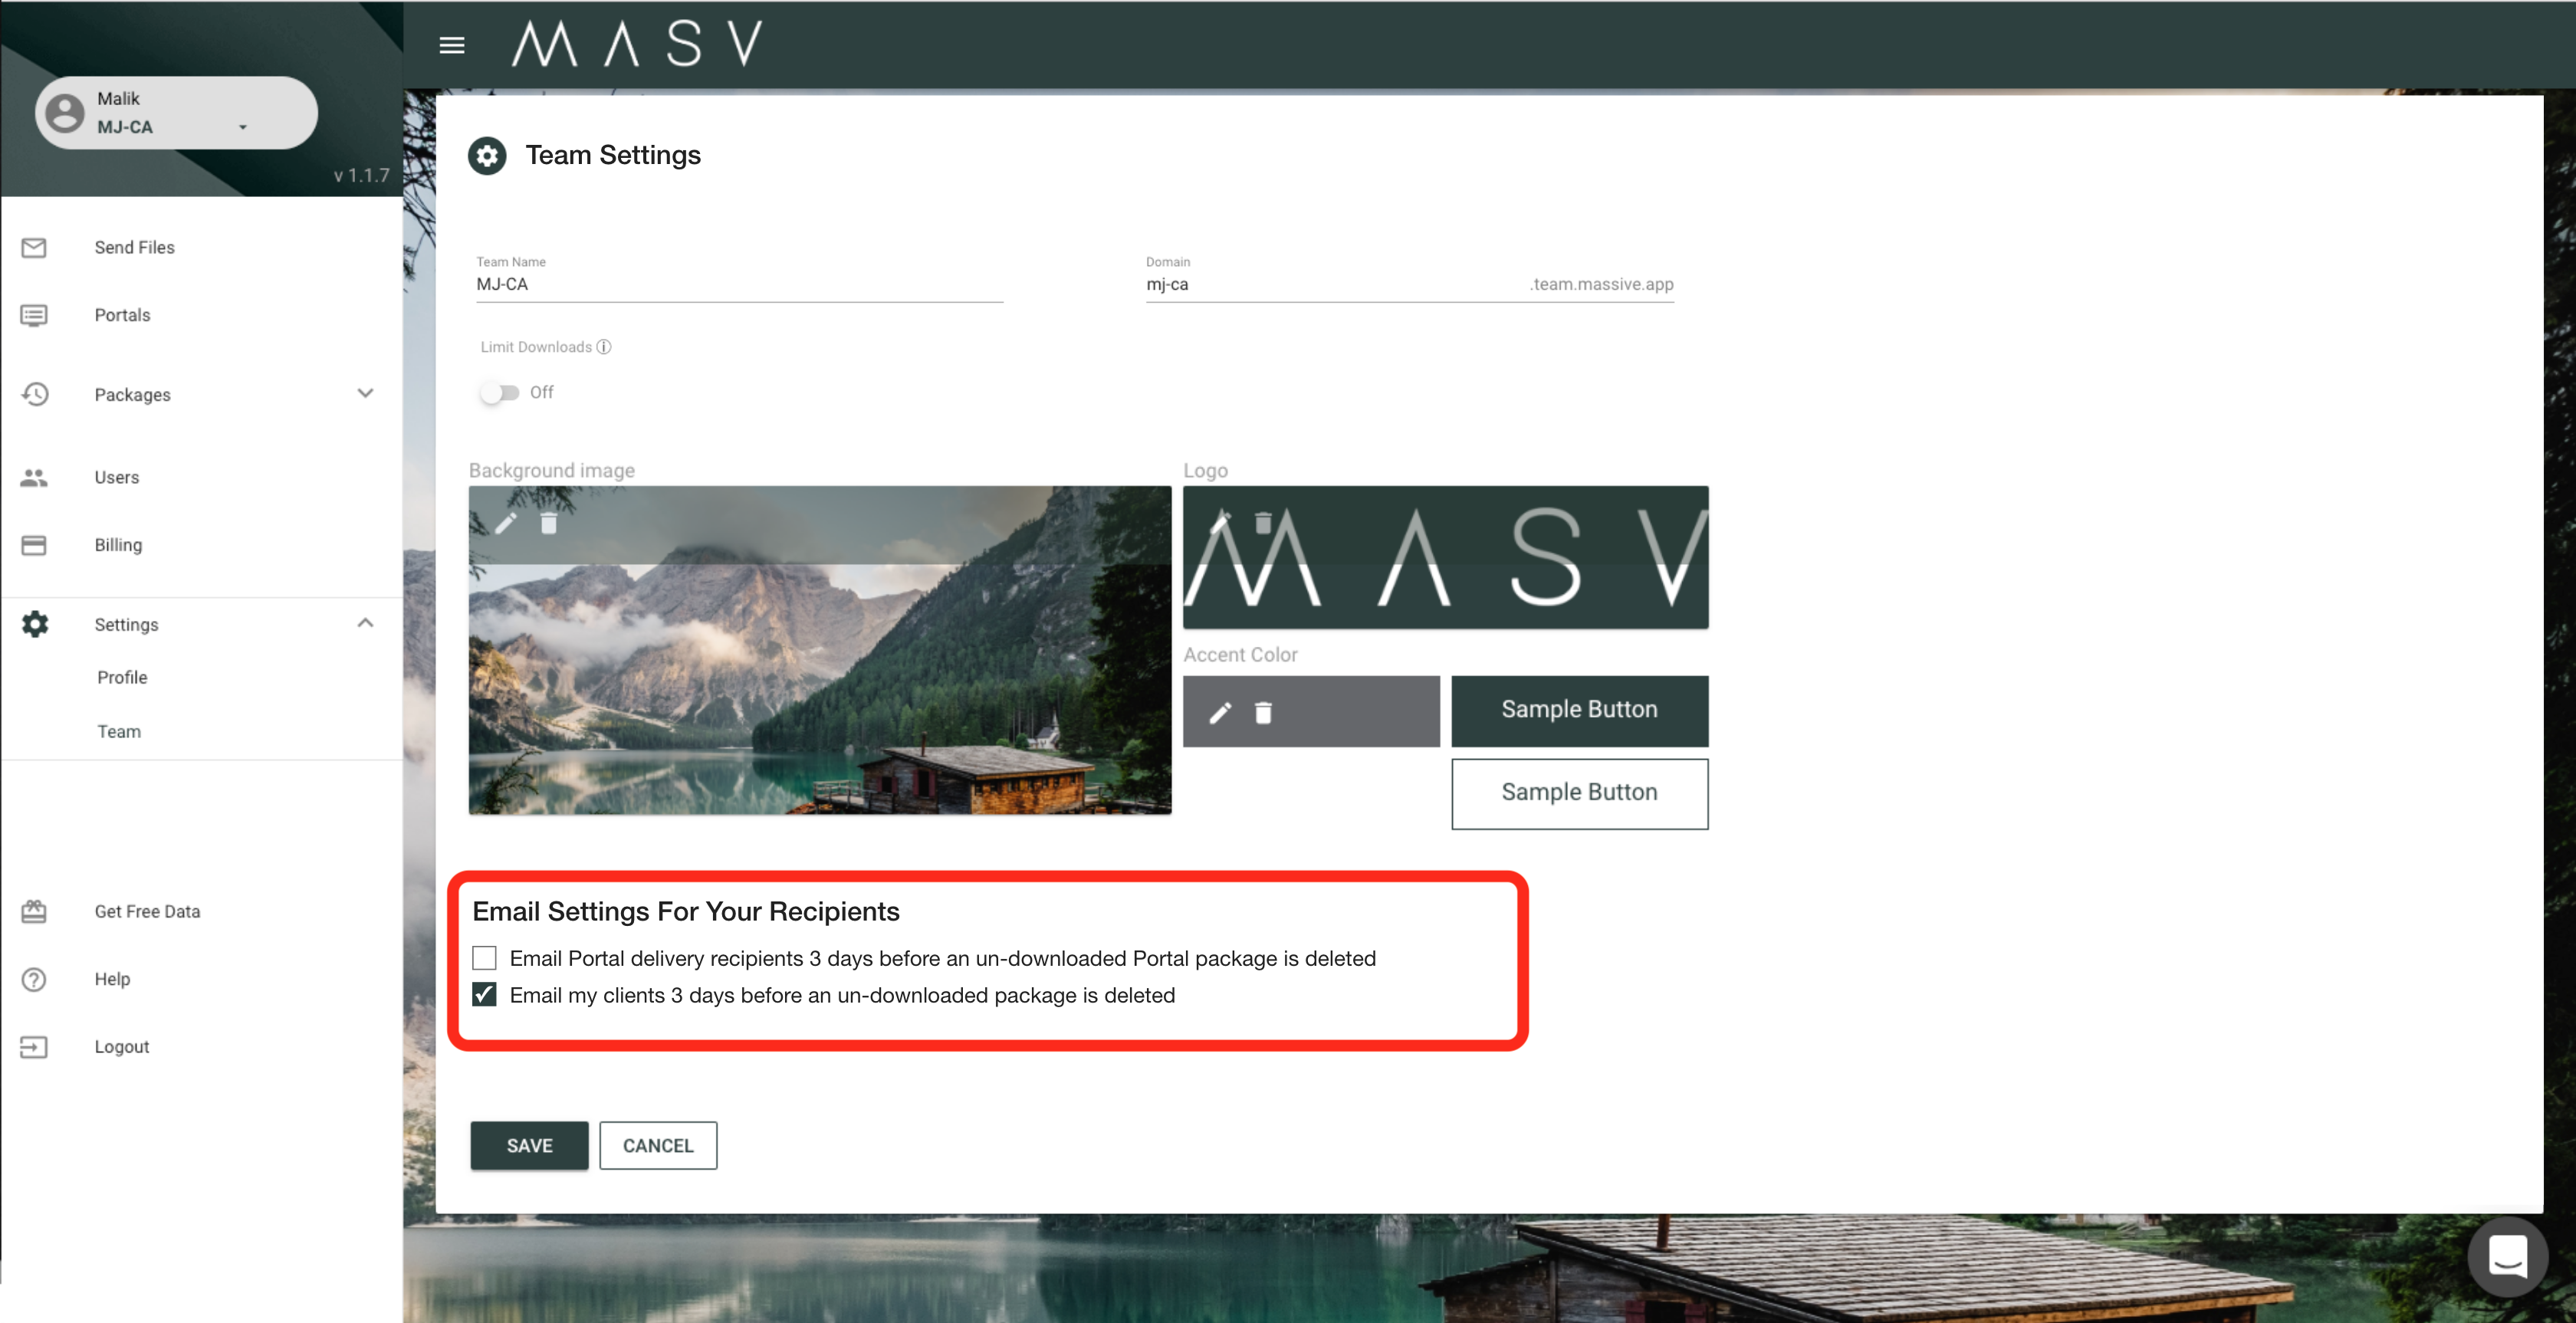 MASV email settings for your recipients